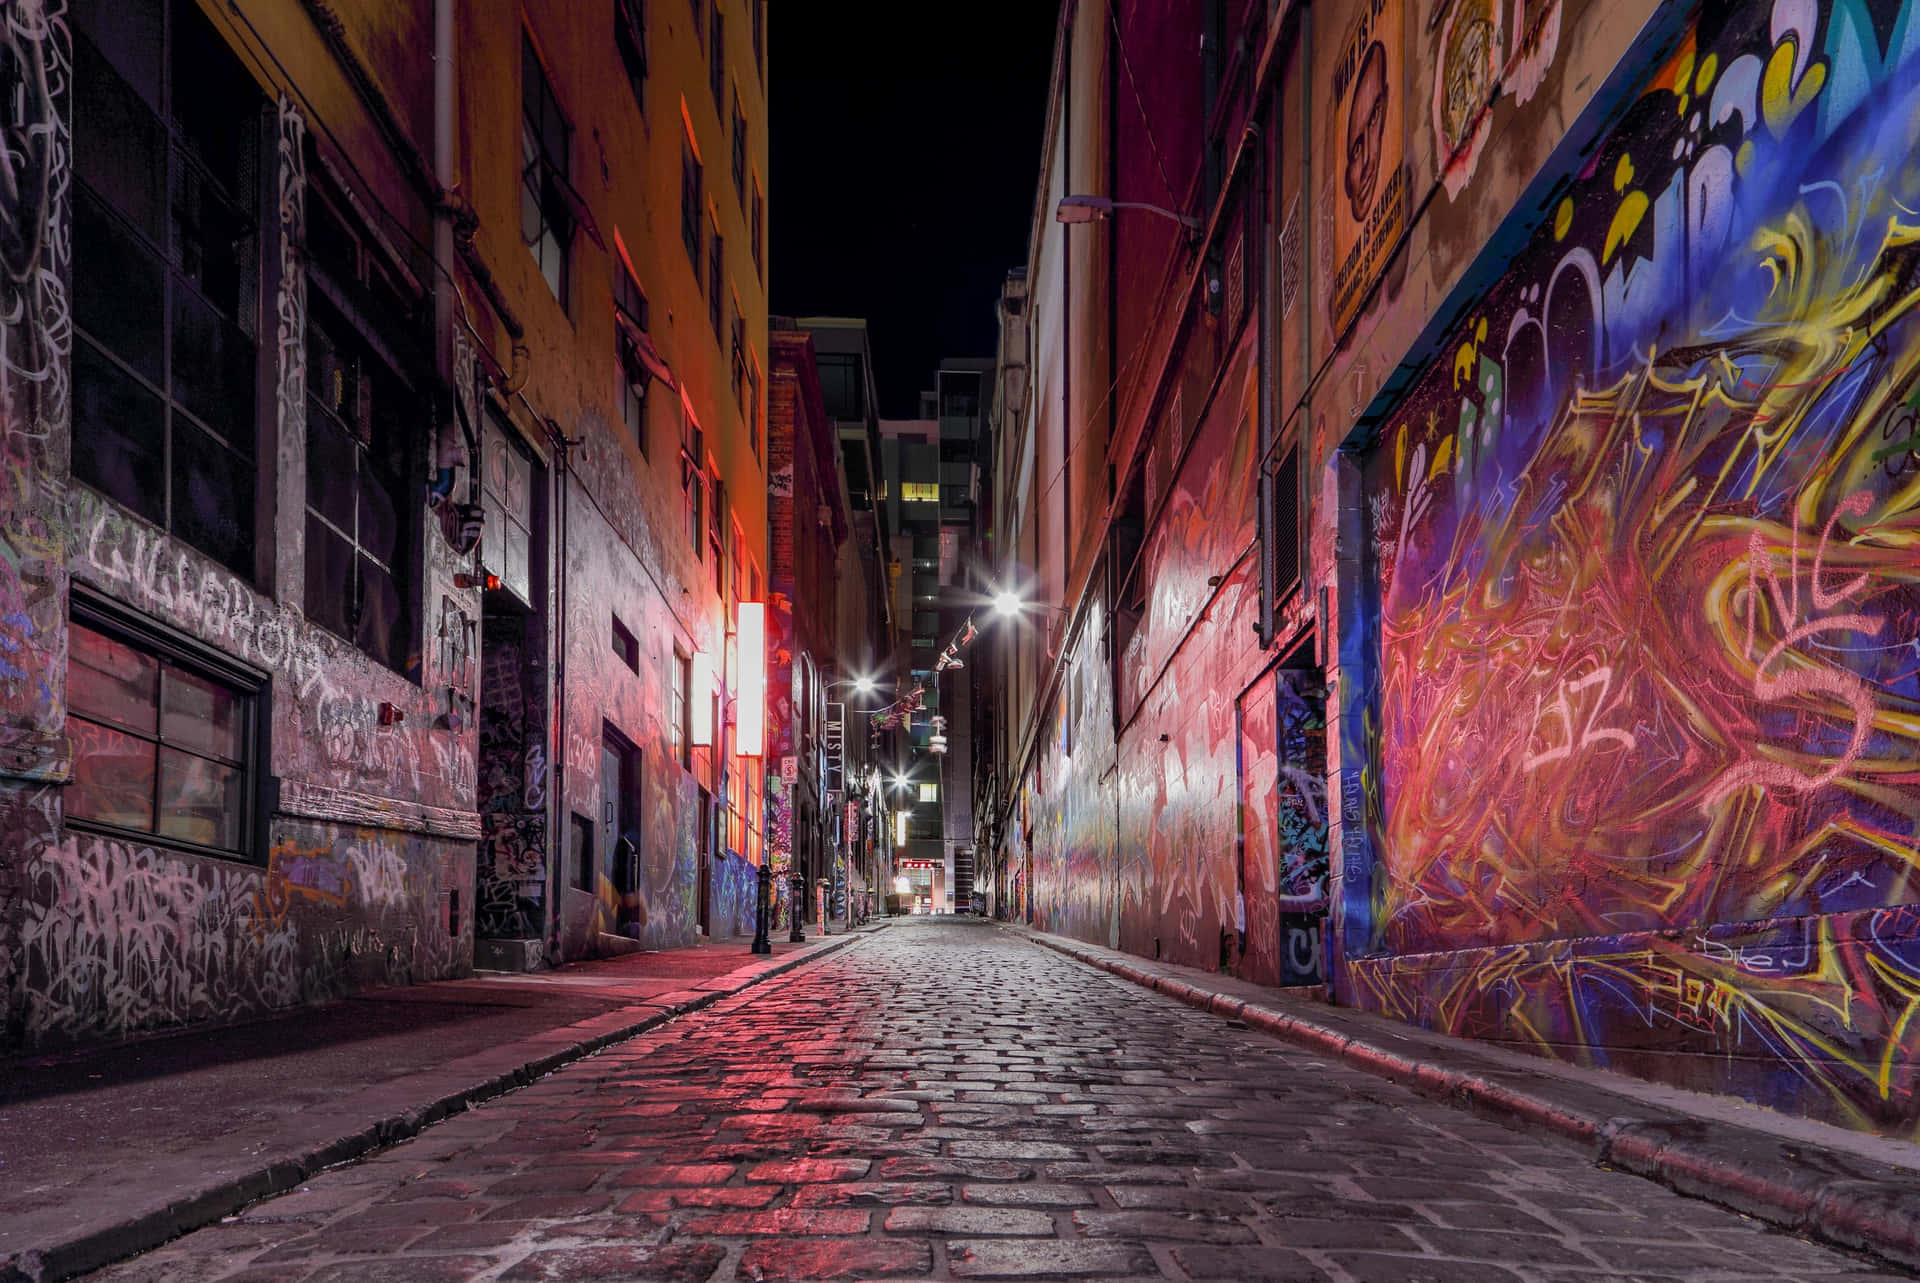 Alley Photos Download The BEST Free Alley Stock Photos  HD Images